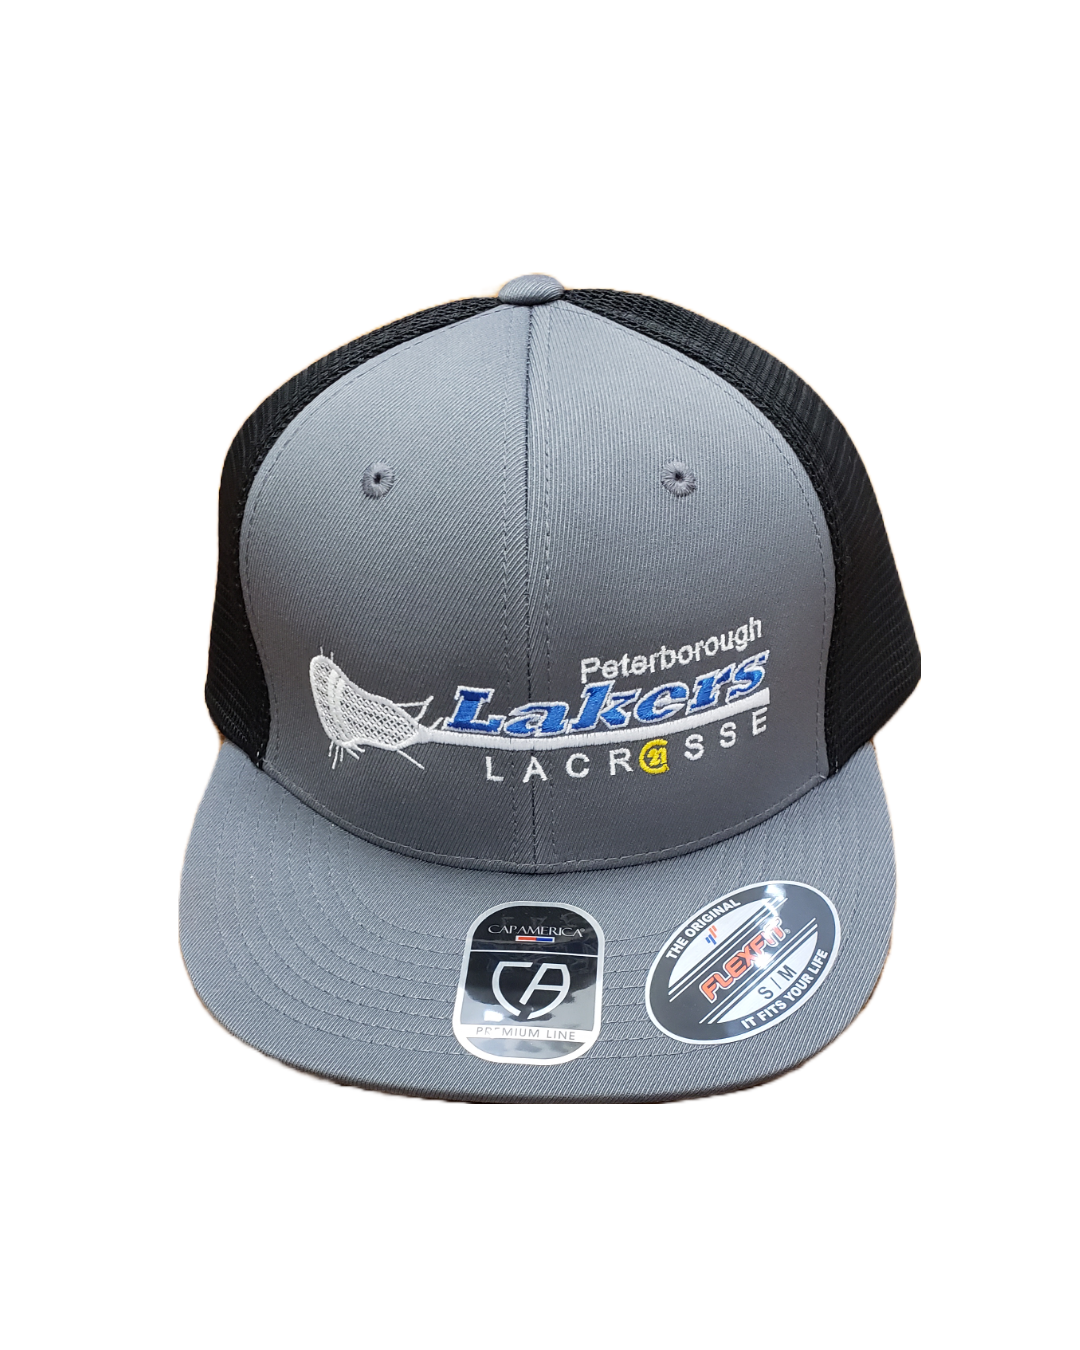 Peterborough Lakers Flexfit Tech 110 fitted hat